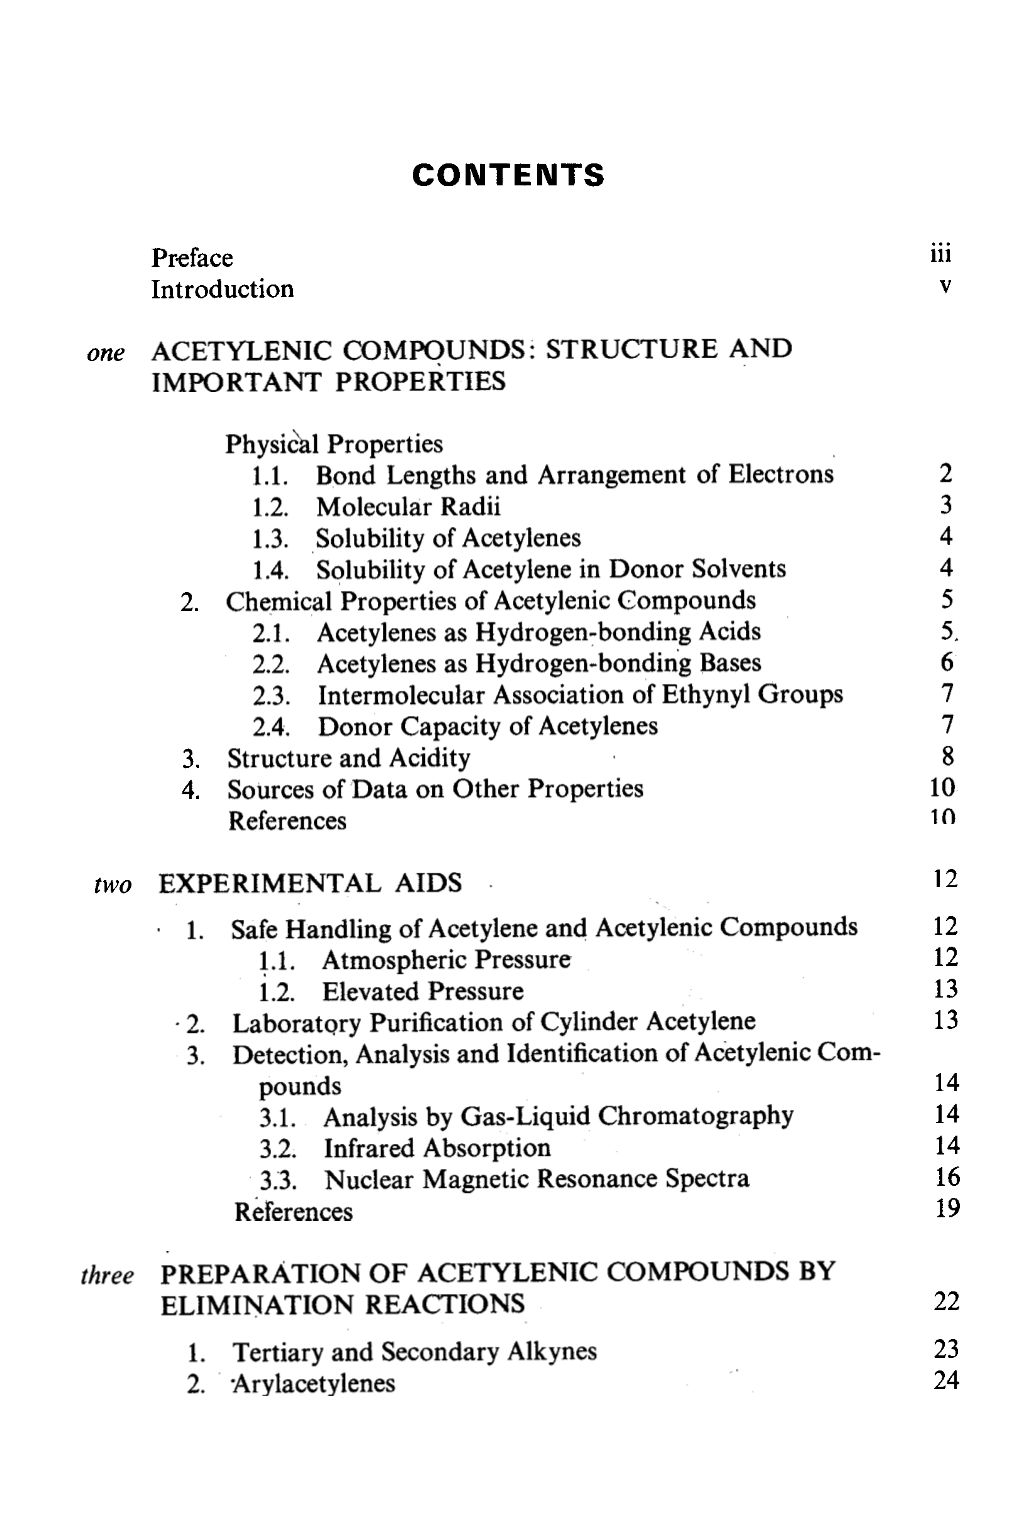 CONTENTS ACETYLENIC Compqunds: STRUCTURE AND